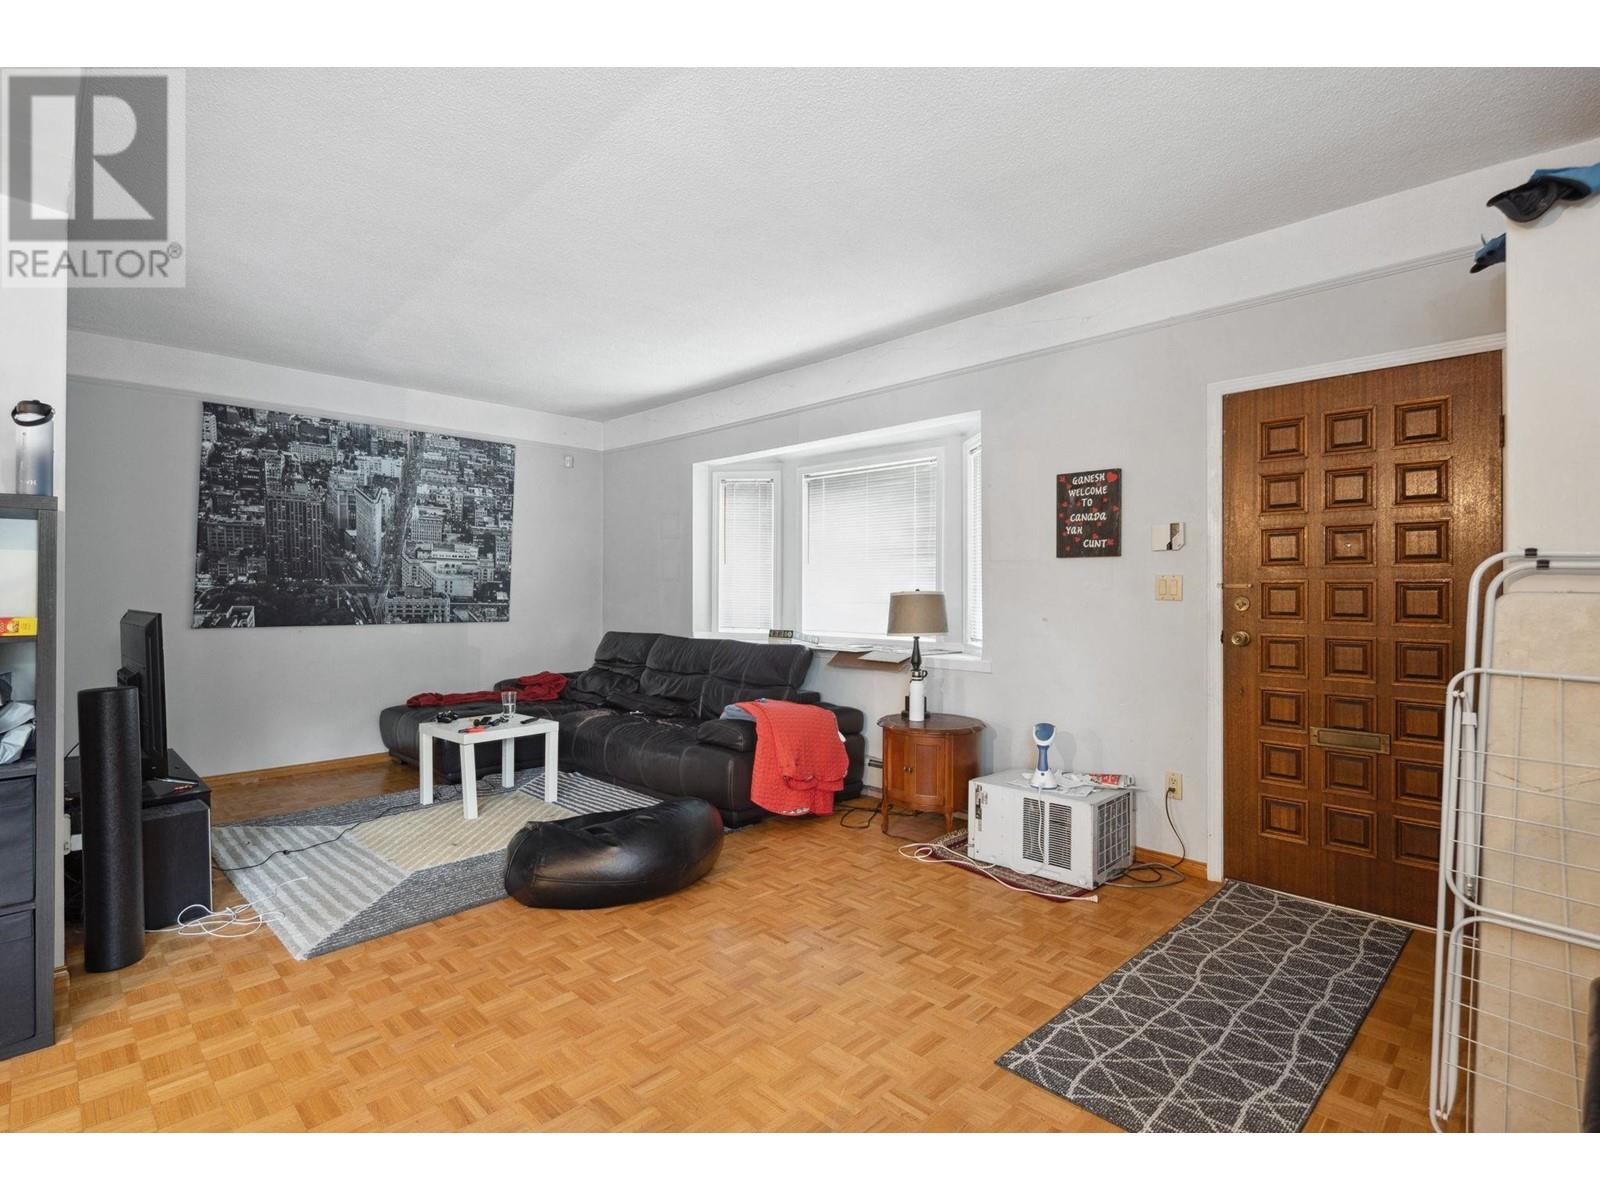 Listing Picture 2 of 32 : 3099 W 6TH AVENUE, Vancouver / 溫哥華 - 魯藝地產 Yvonne Lu Group - MLS Medallion Club Member